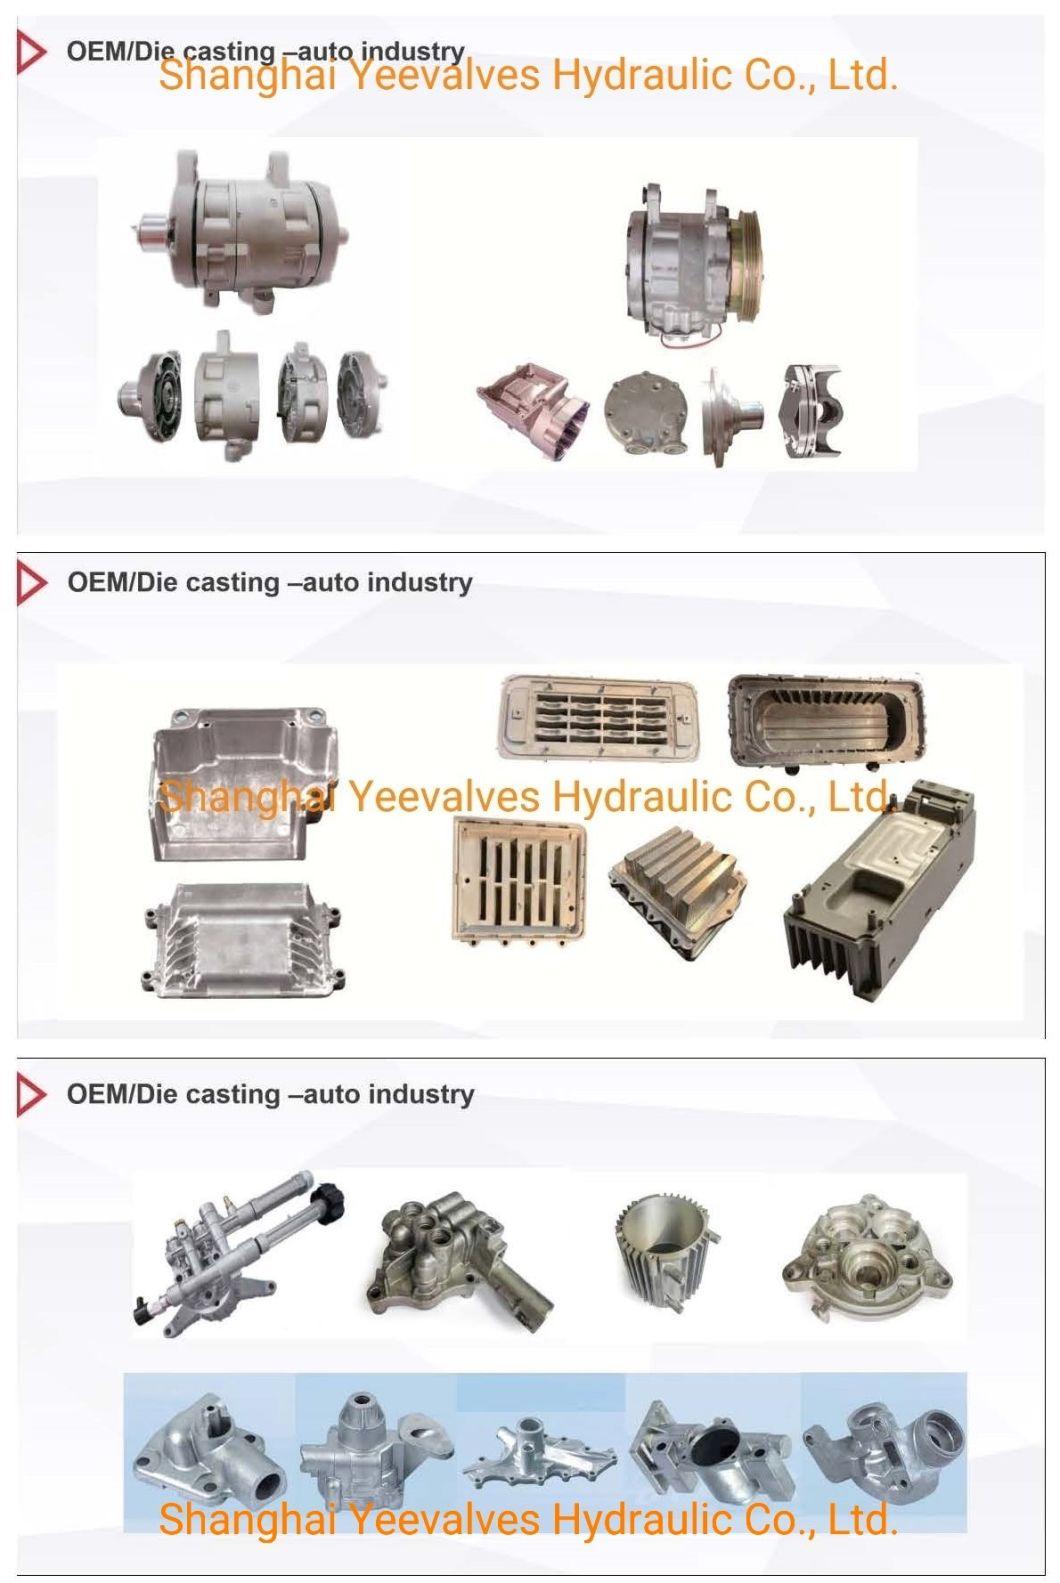 Sun Rexroth Hawe Cartridge Valve Hydraulic Valves Operated Directly Pressure with CNC Machining